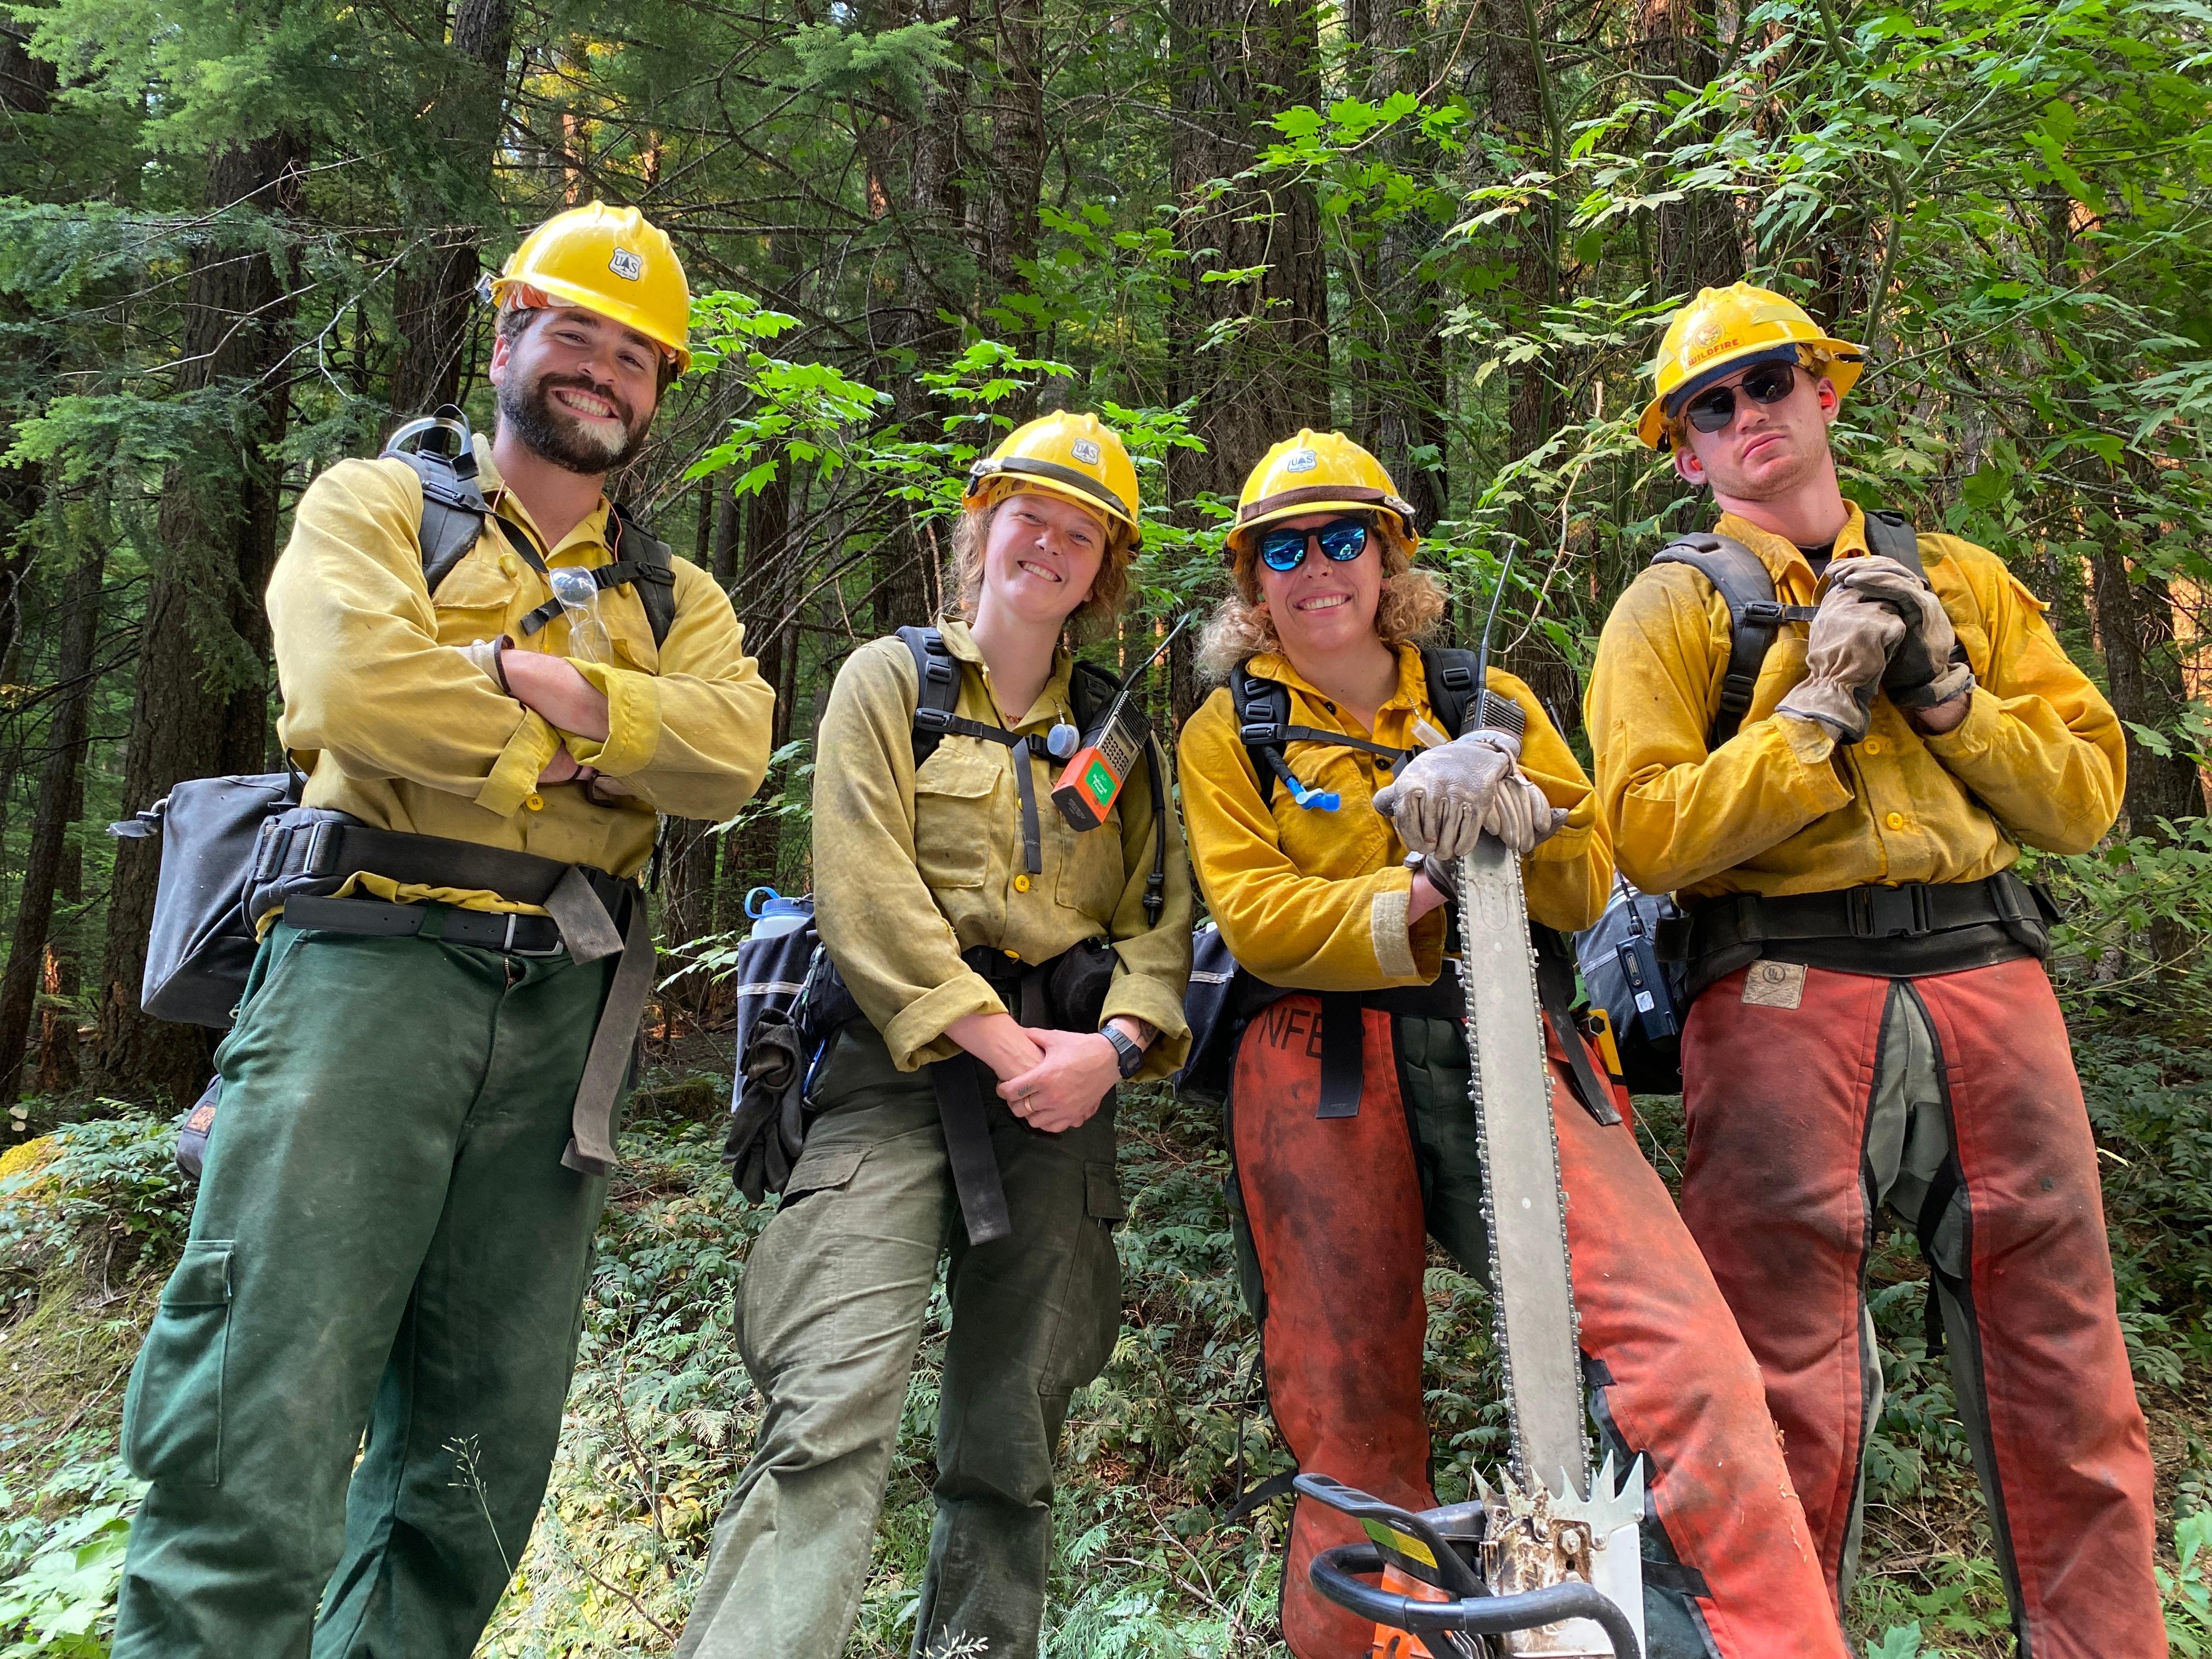 Two firefighters from an interagency crew from the Columbia River Gorge (BLM, USFS -GP -HOOD, and WA DNR) pose for a picture. One individual holds a large chainsaw, three others smiles holding their tools.